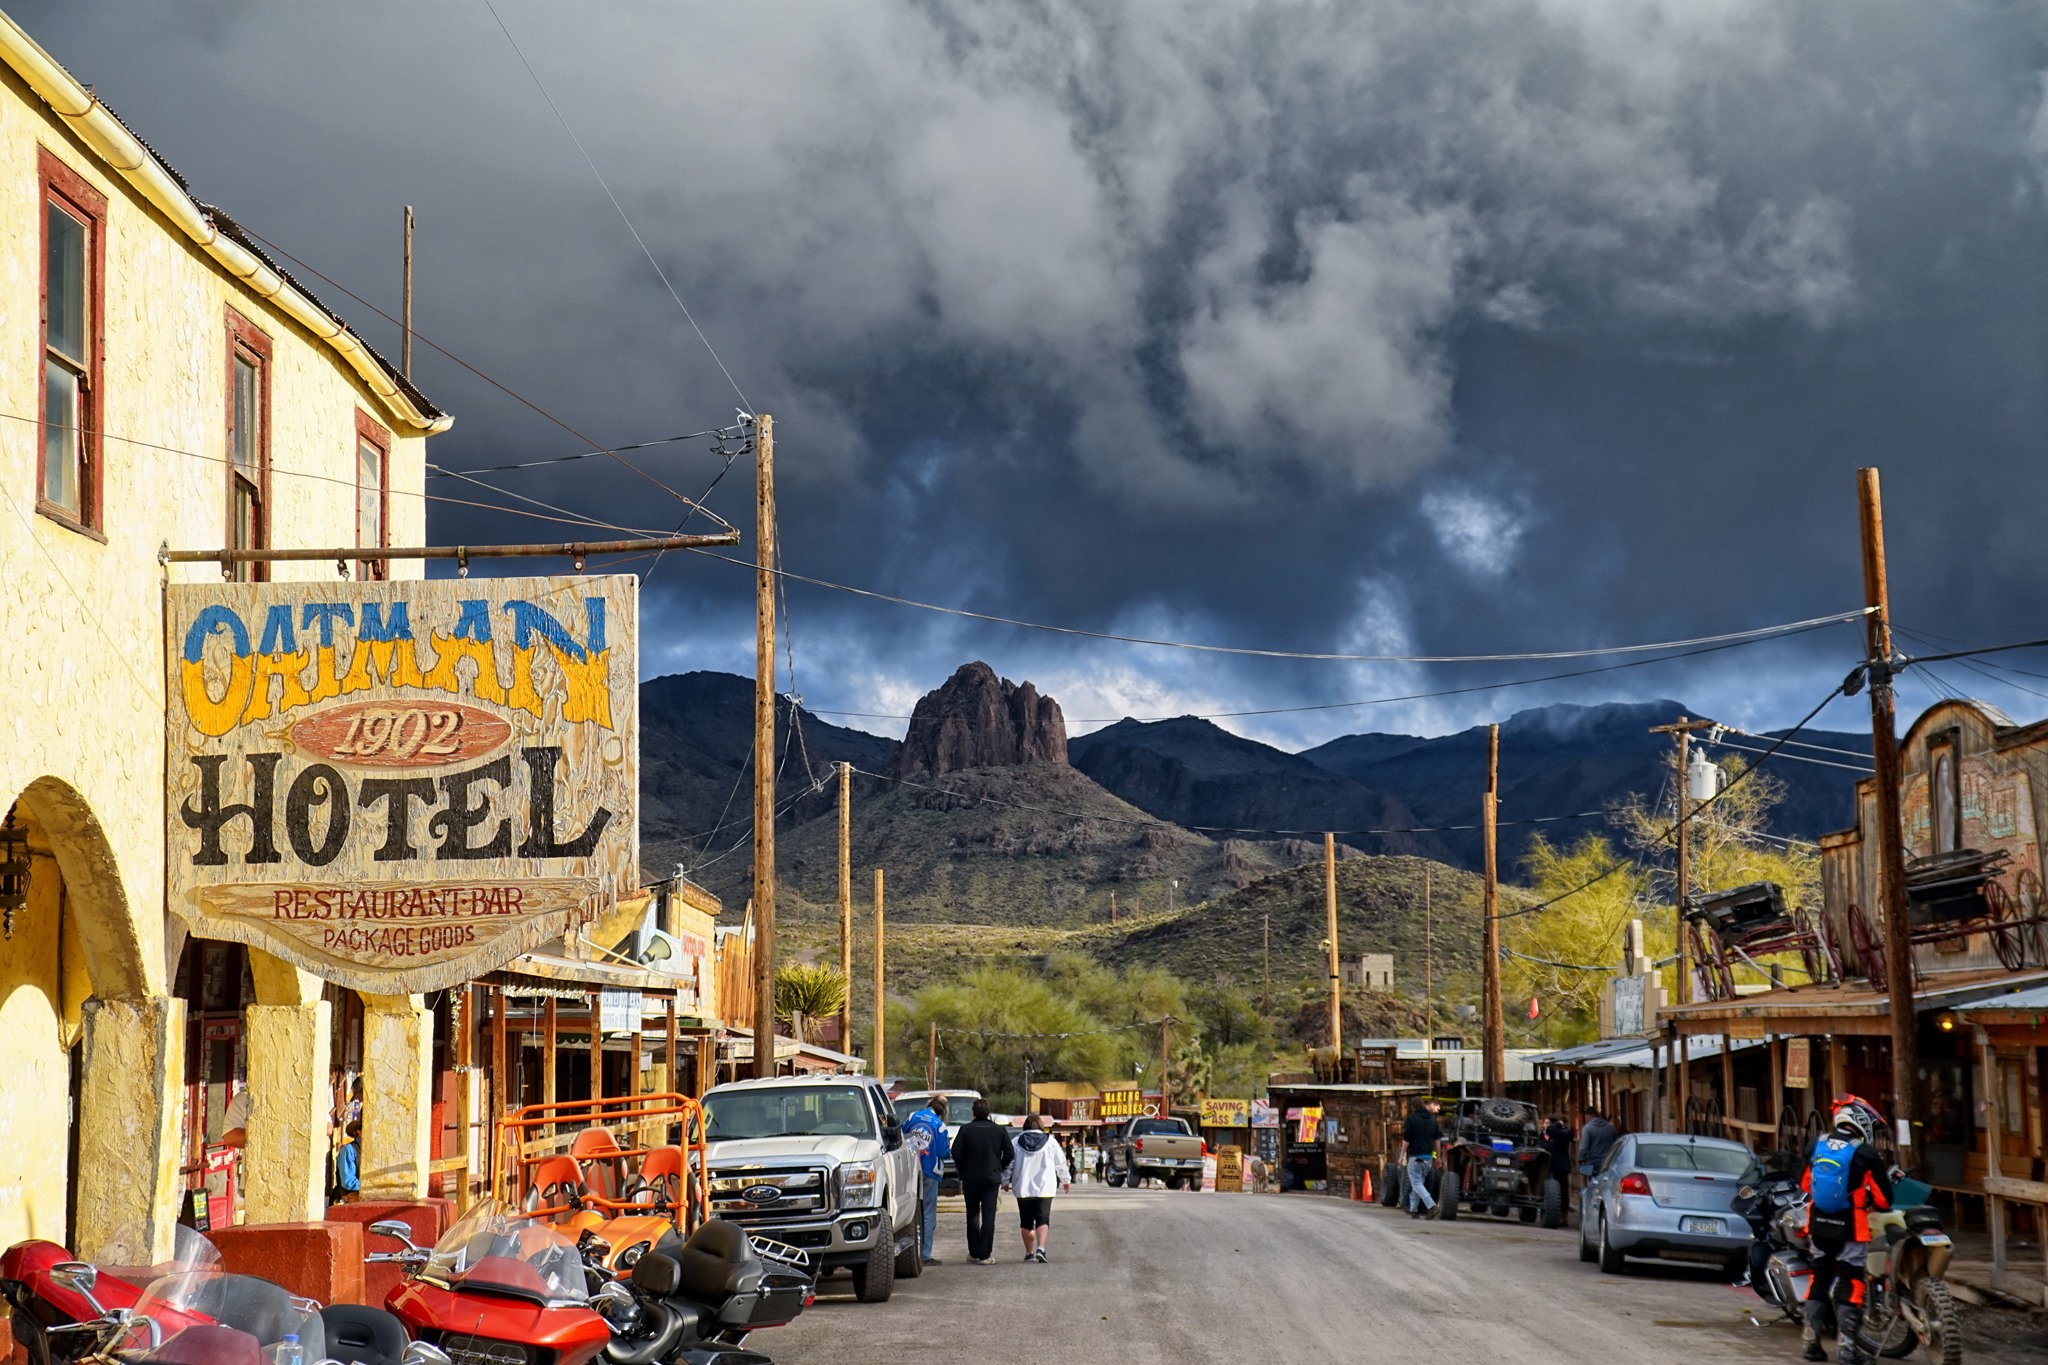 A storm is coming to downtown Oatman, Arizona